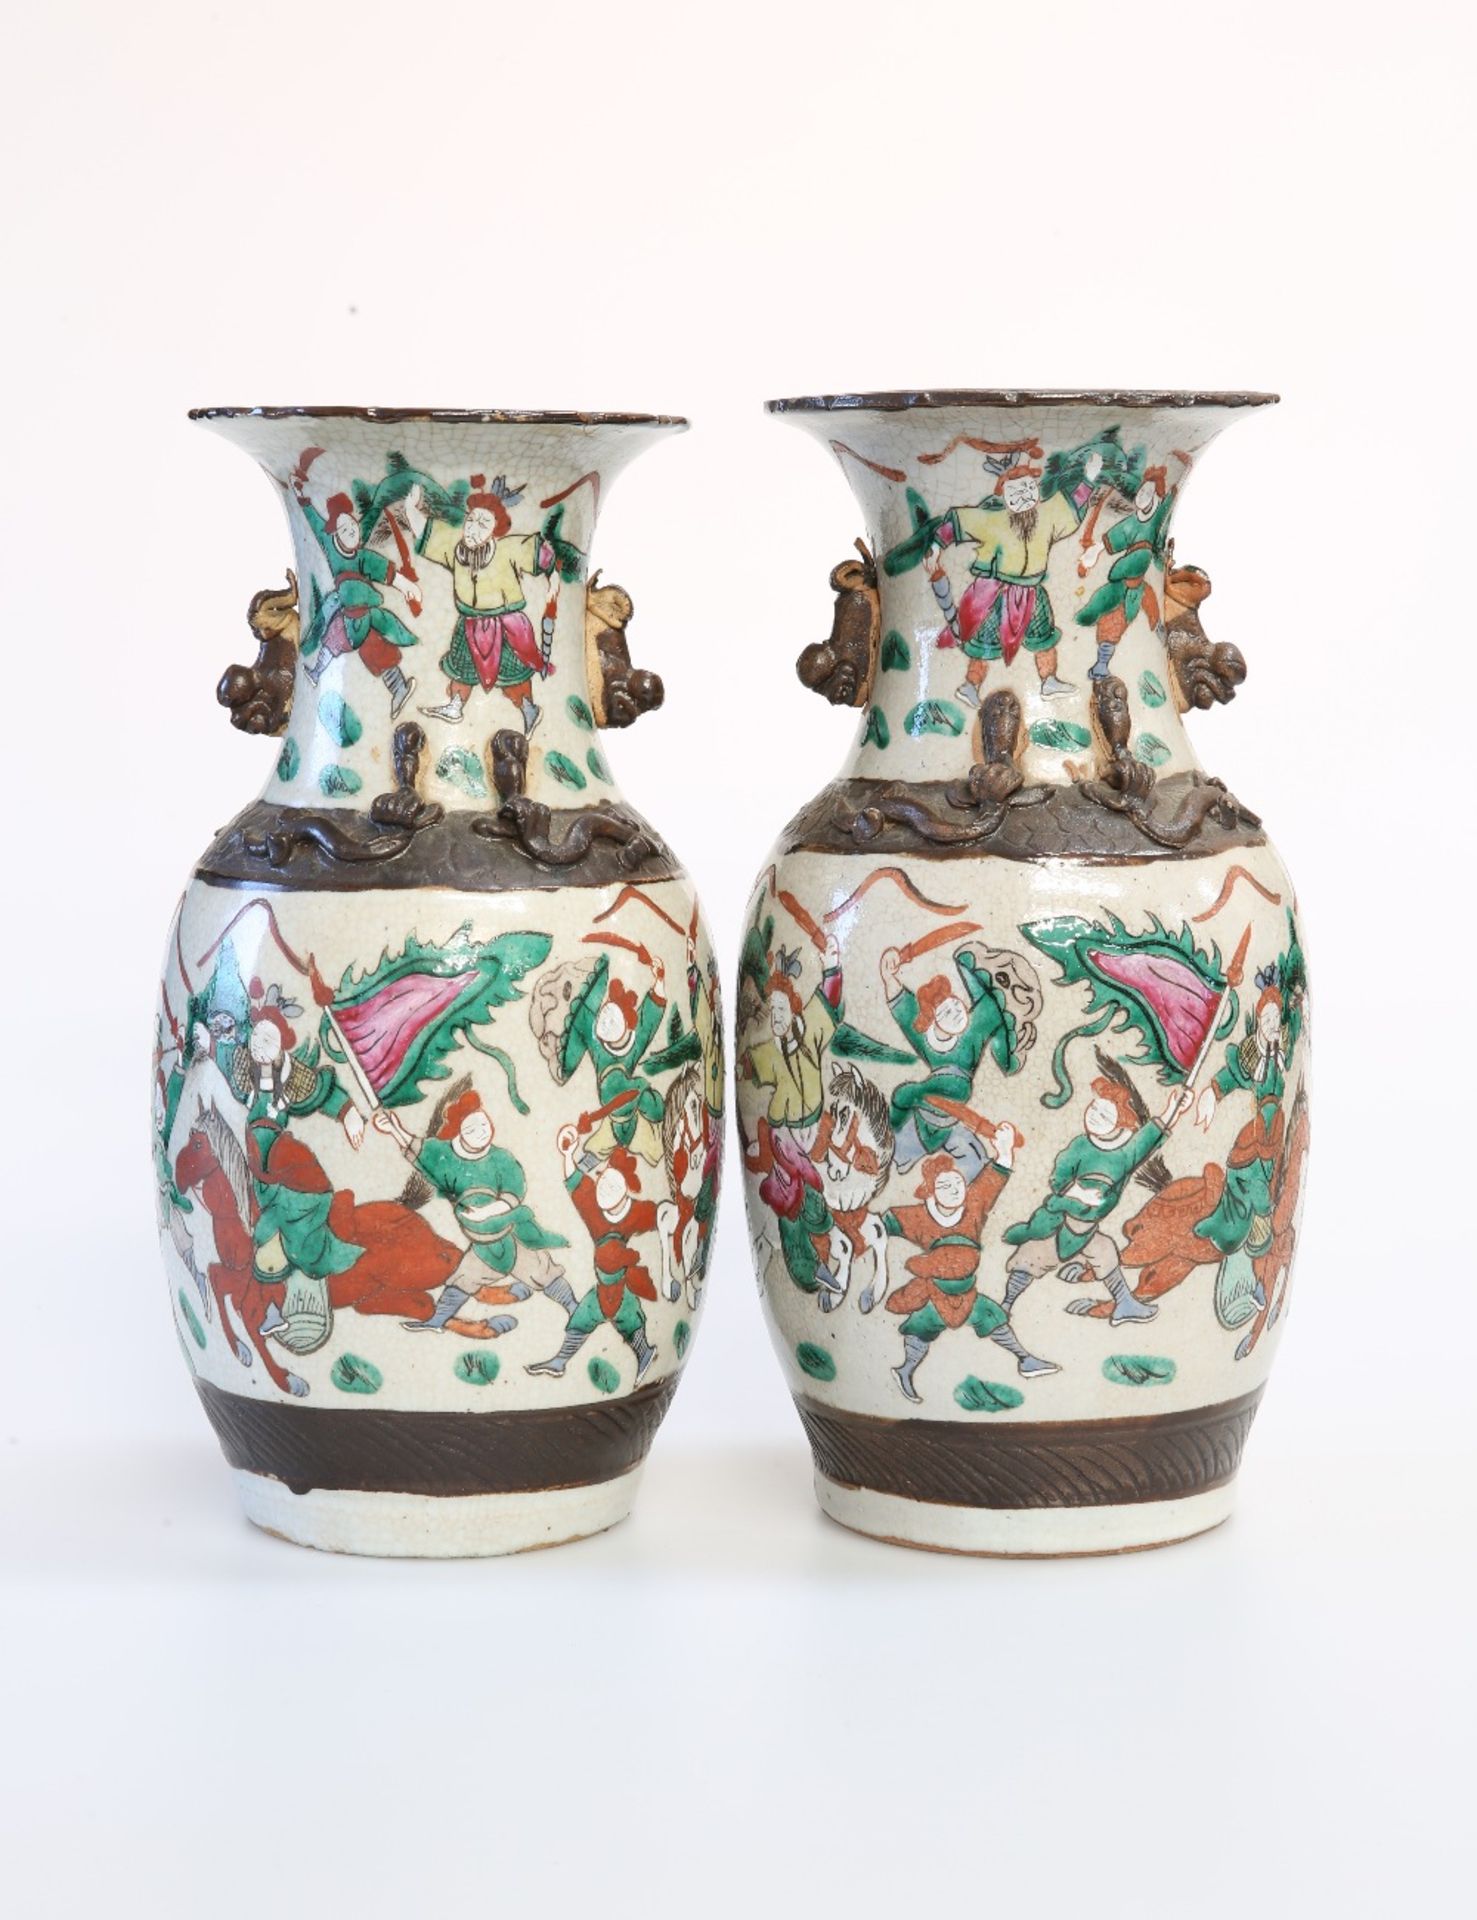 A PAIR OF CHINESE CRACKLE GLAZE VASES IN THE ARCHAIC TASTE